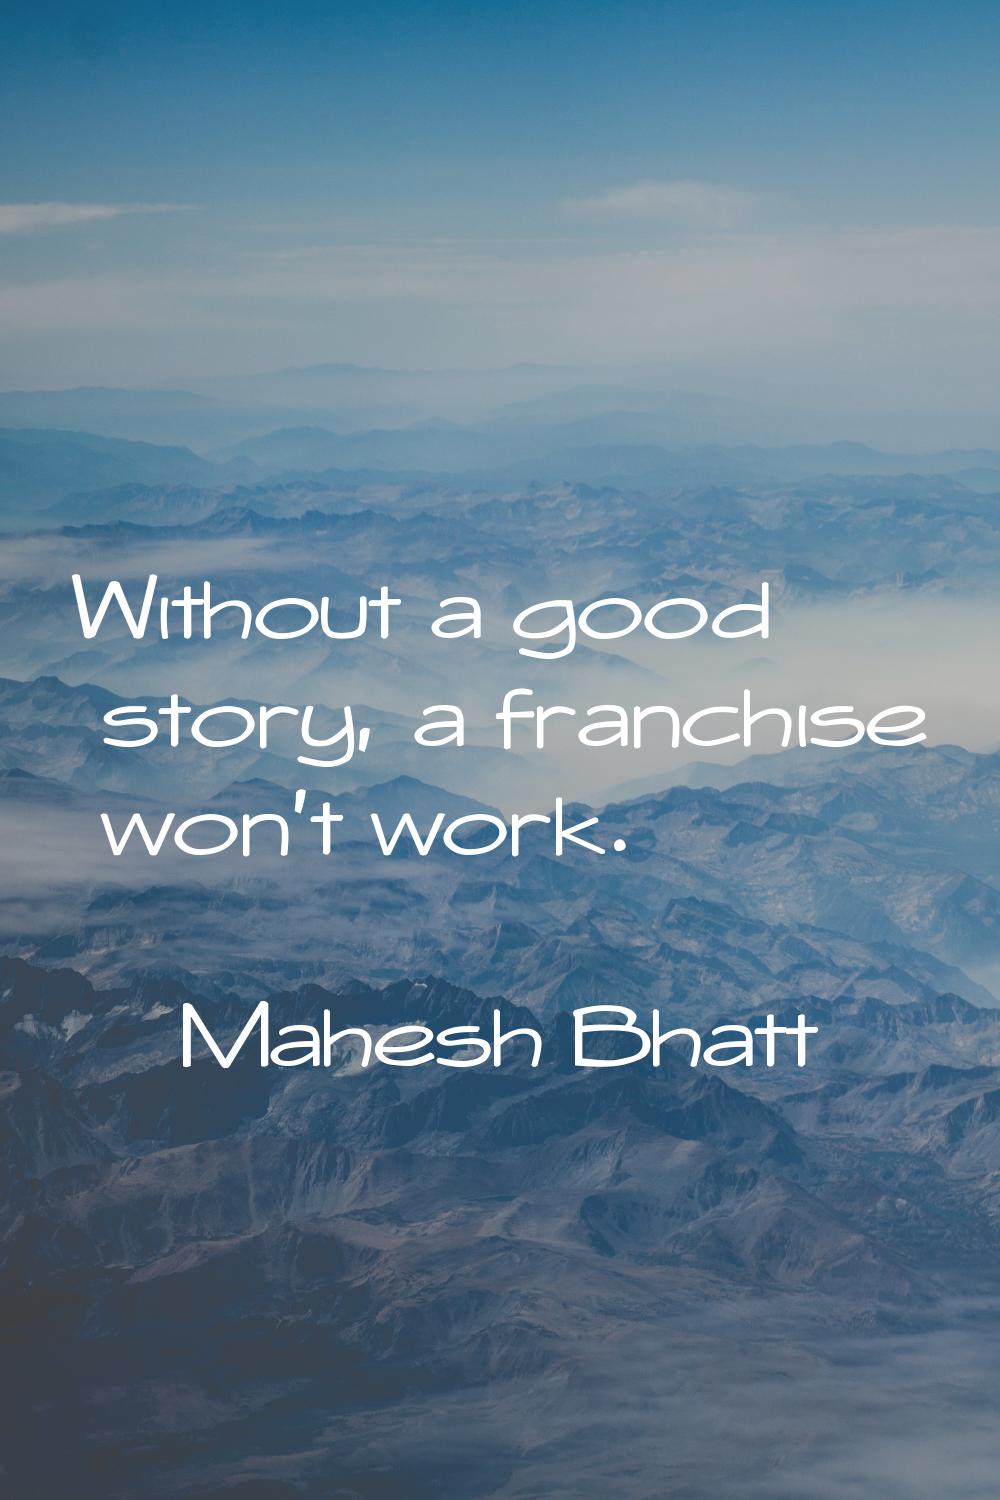 Without a good story, a franchise won't work.